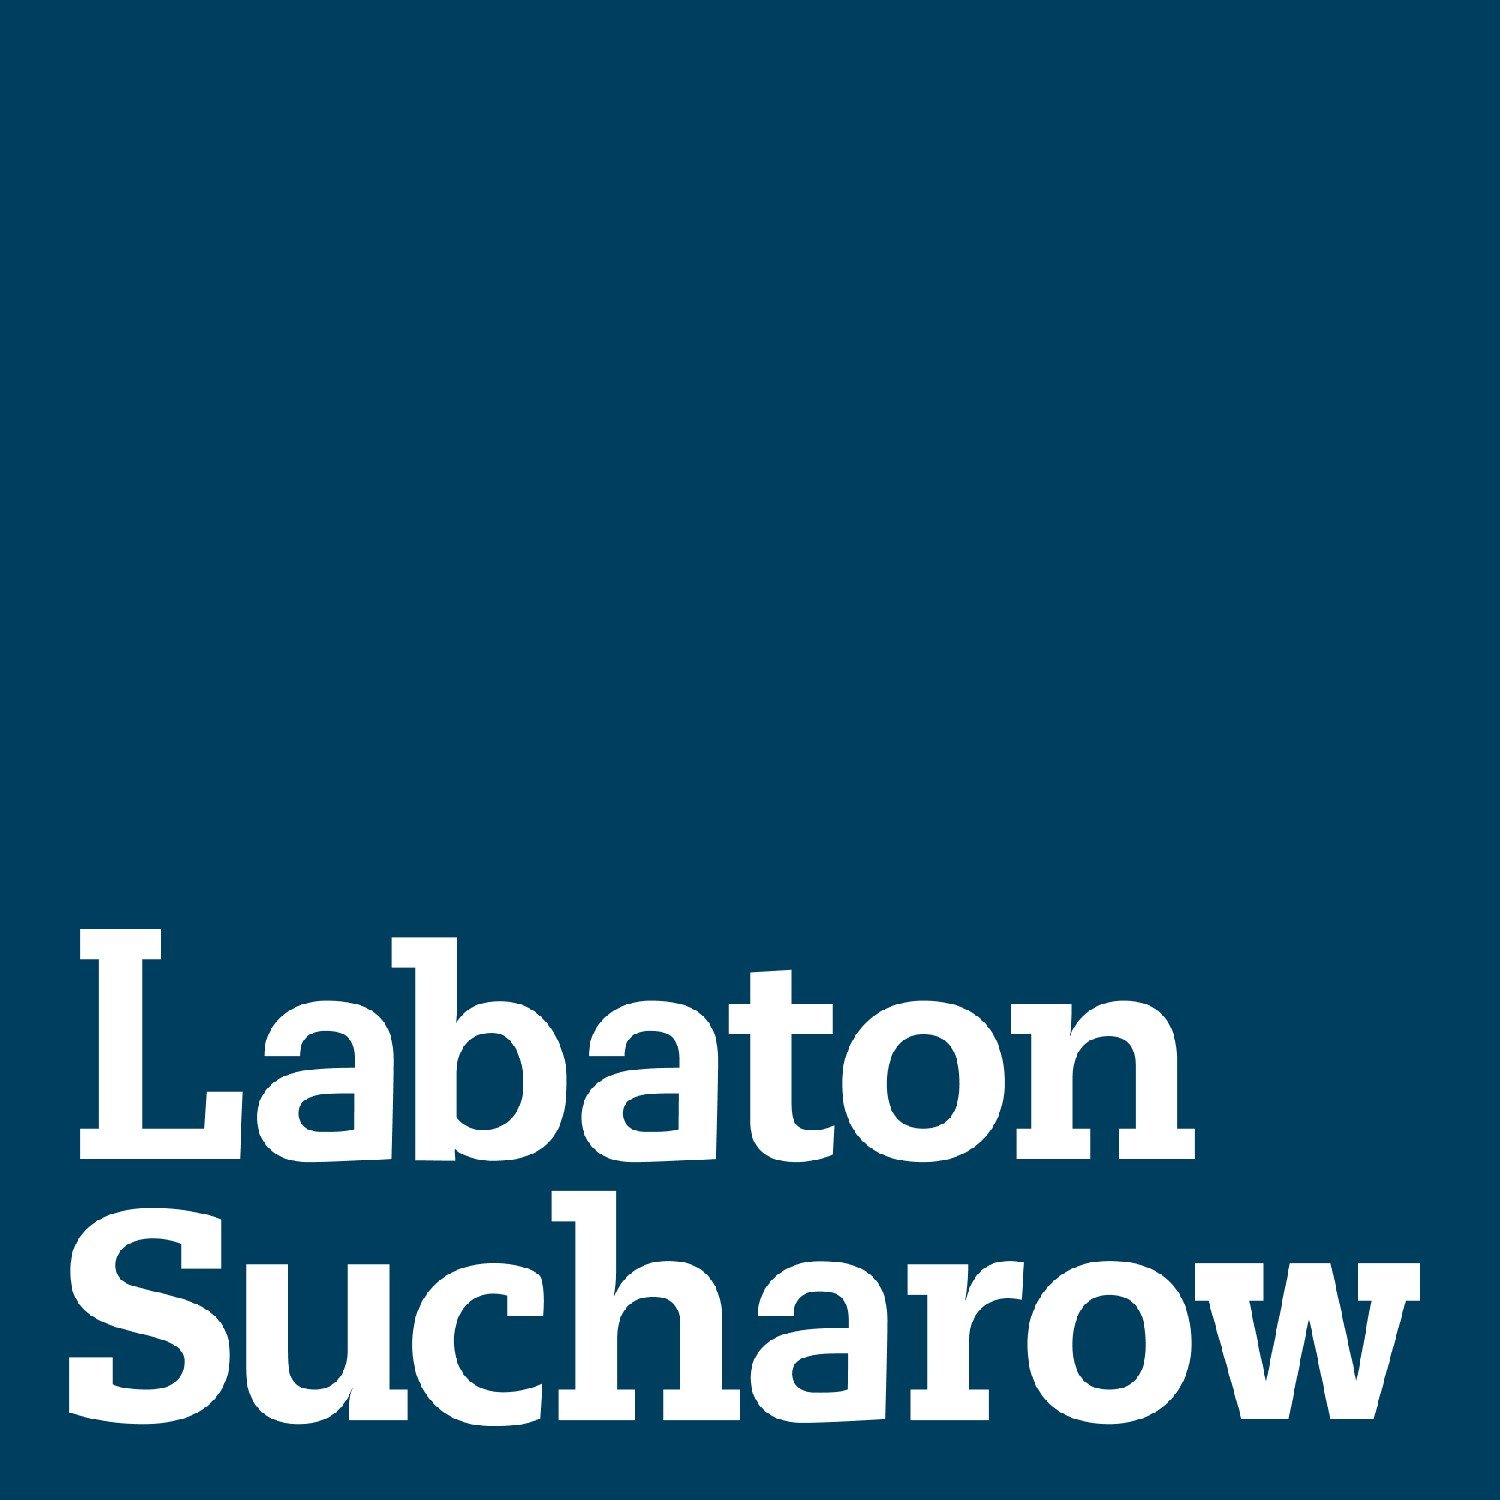 Labaton Sucharow LLP, Monday, July 26, 2021, Press release picture